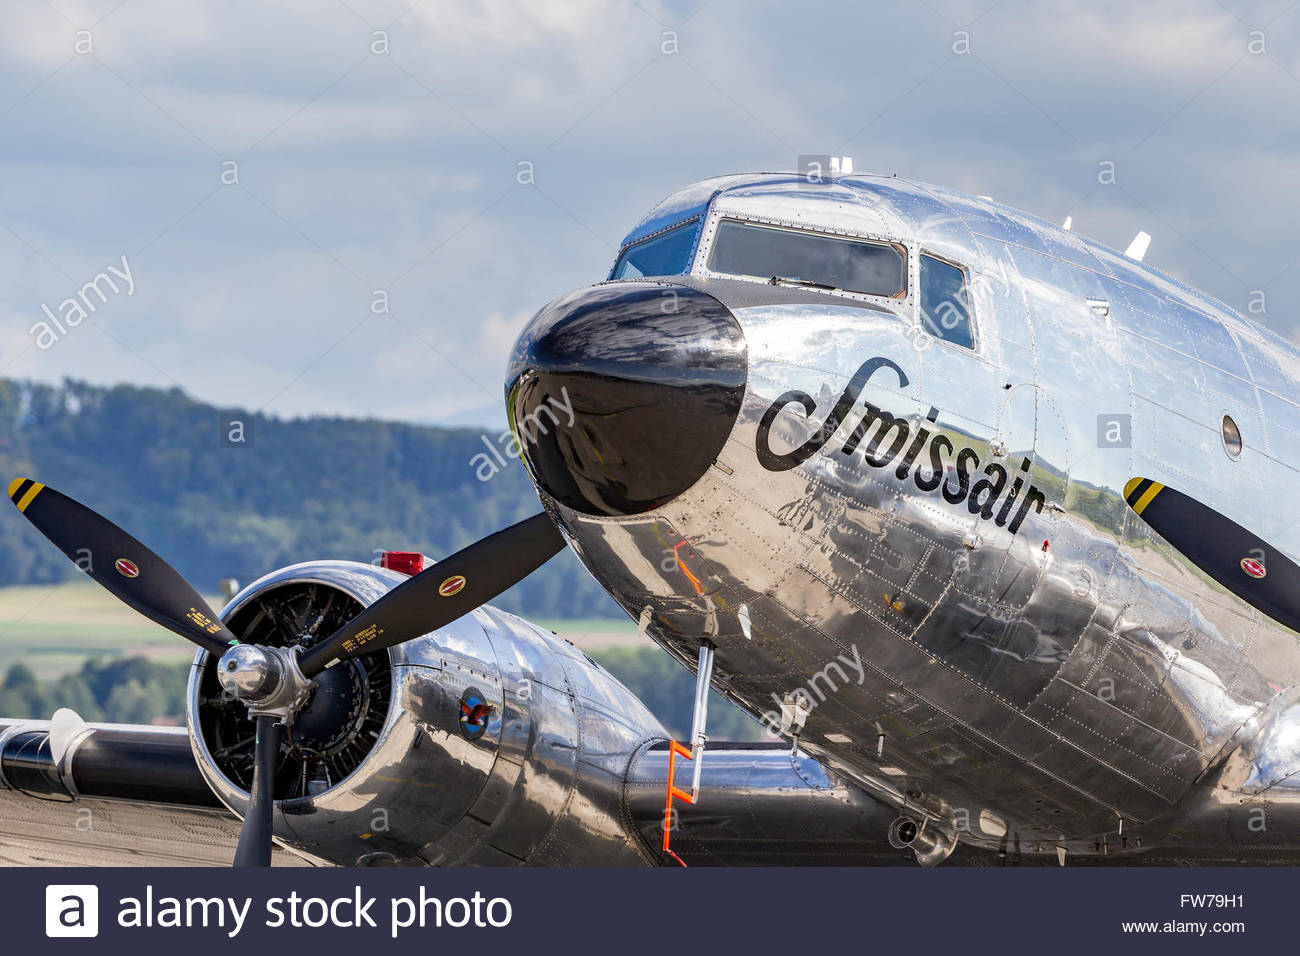 douglas-dc-3c-n431hm-in-swissair-markings-with-its-highly-polished-FW79H1.jpg